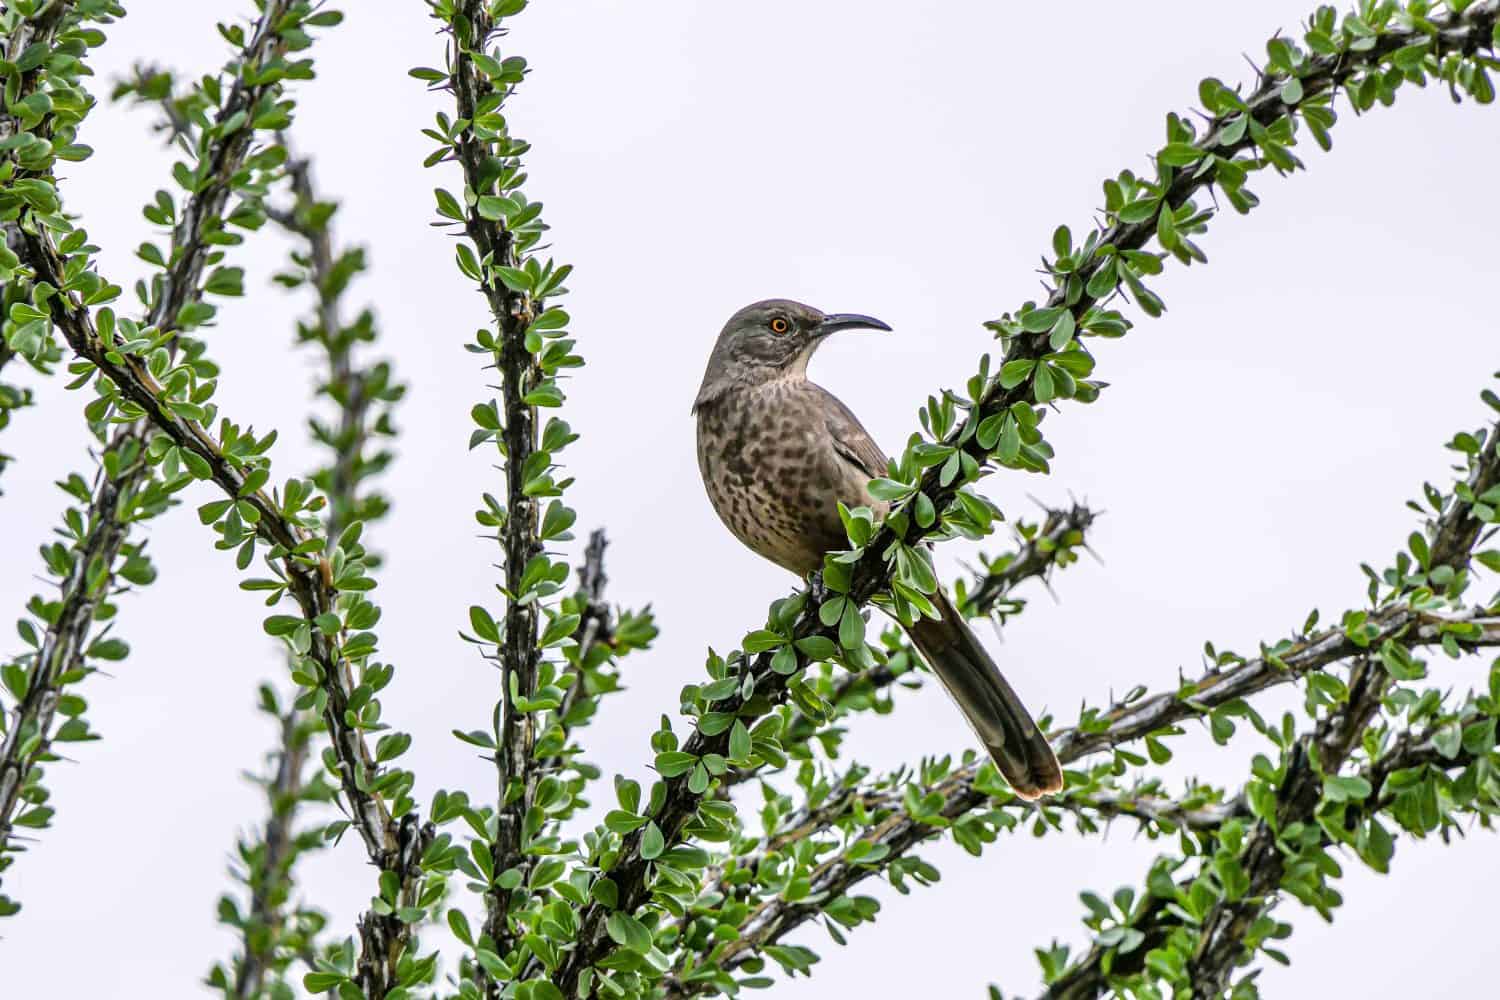 A scenic view of a curve-billed thrasher perched on a tree branch with green leaves